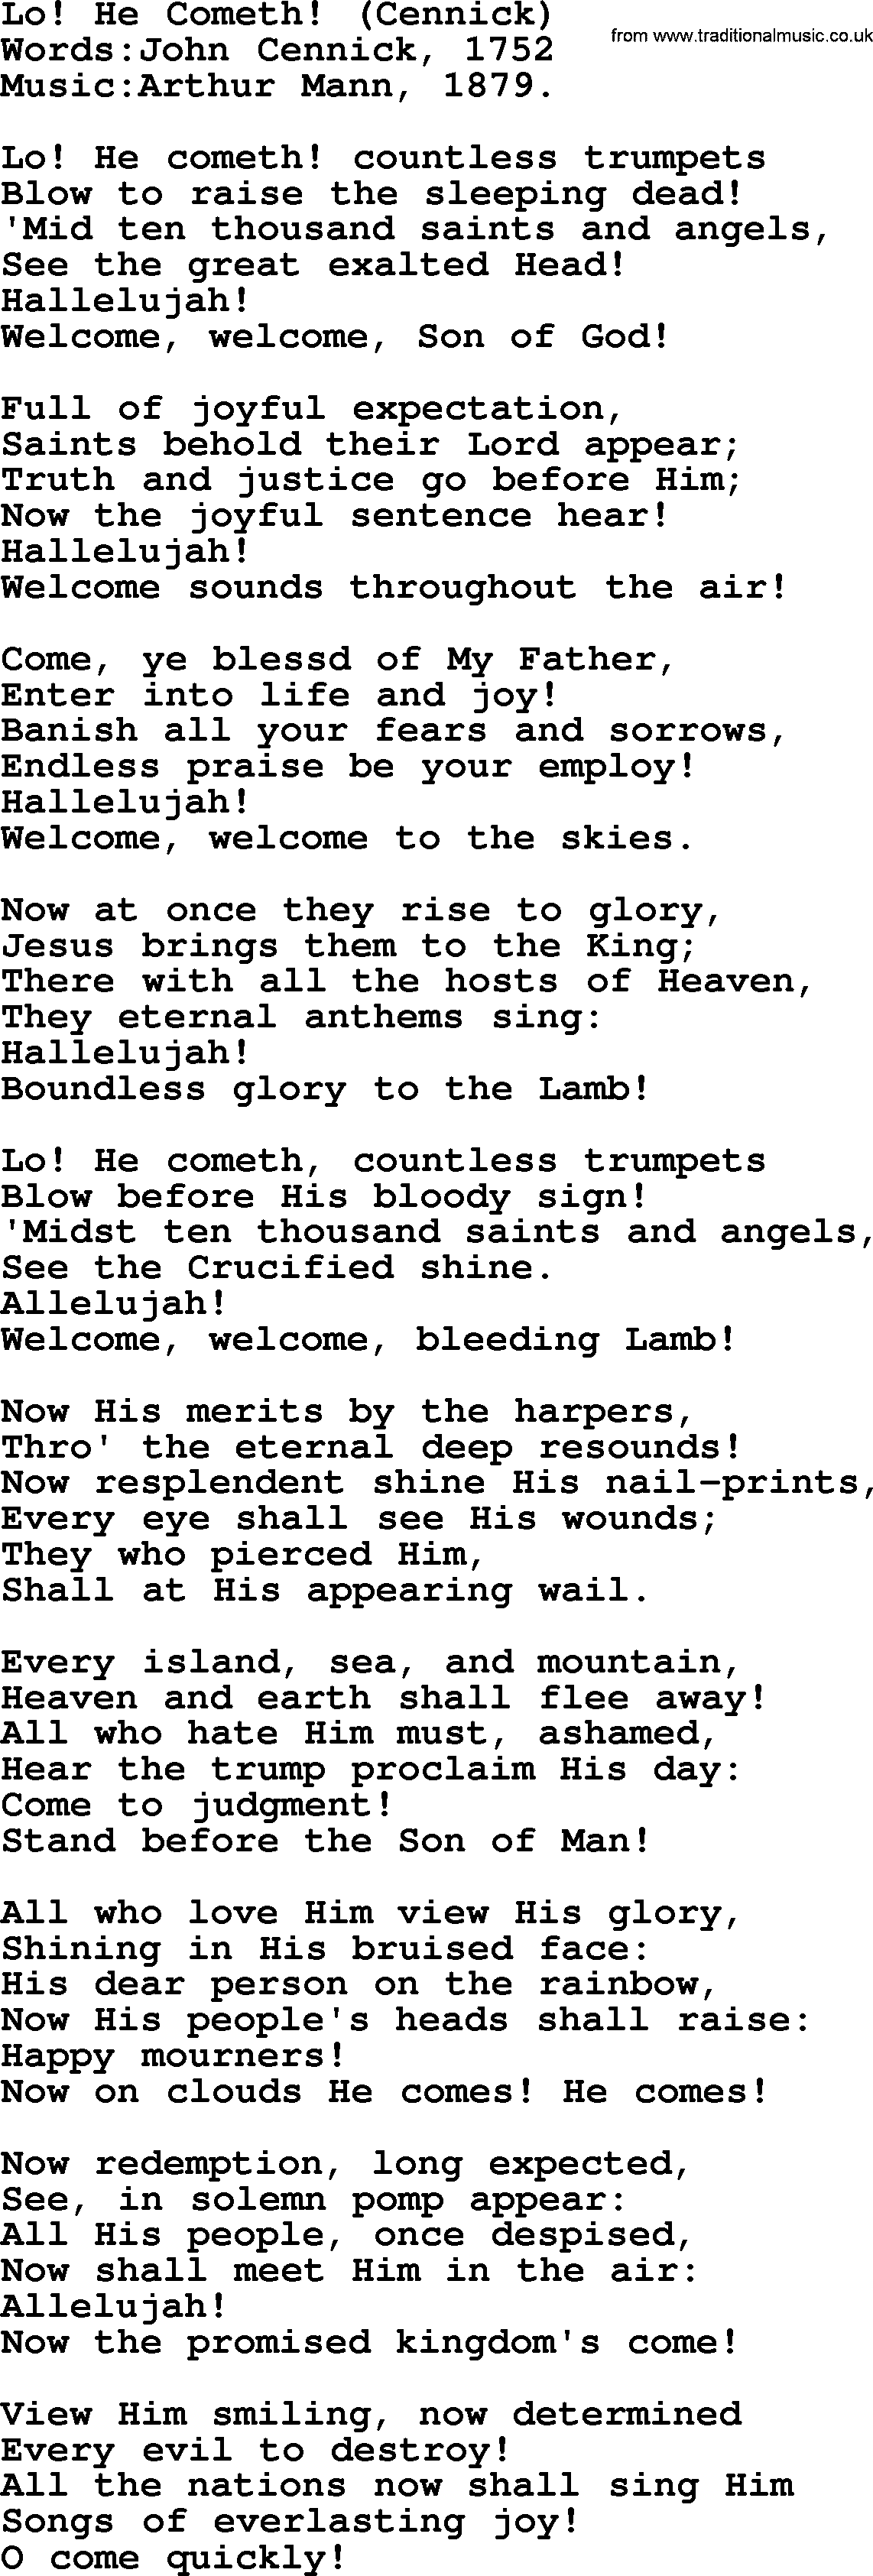 Christian hymns and songs about Jesus' Return(The Second Coming): Lo! He Cometh!(Cennick), lyrics with PDF